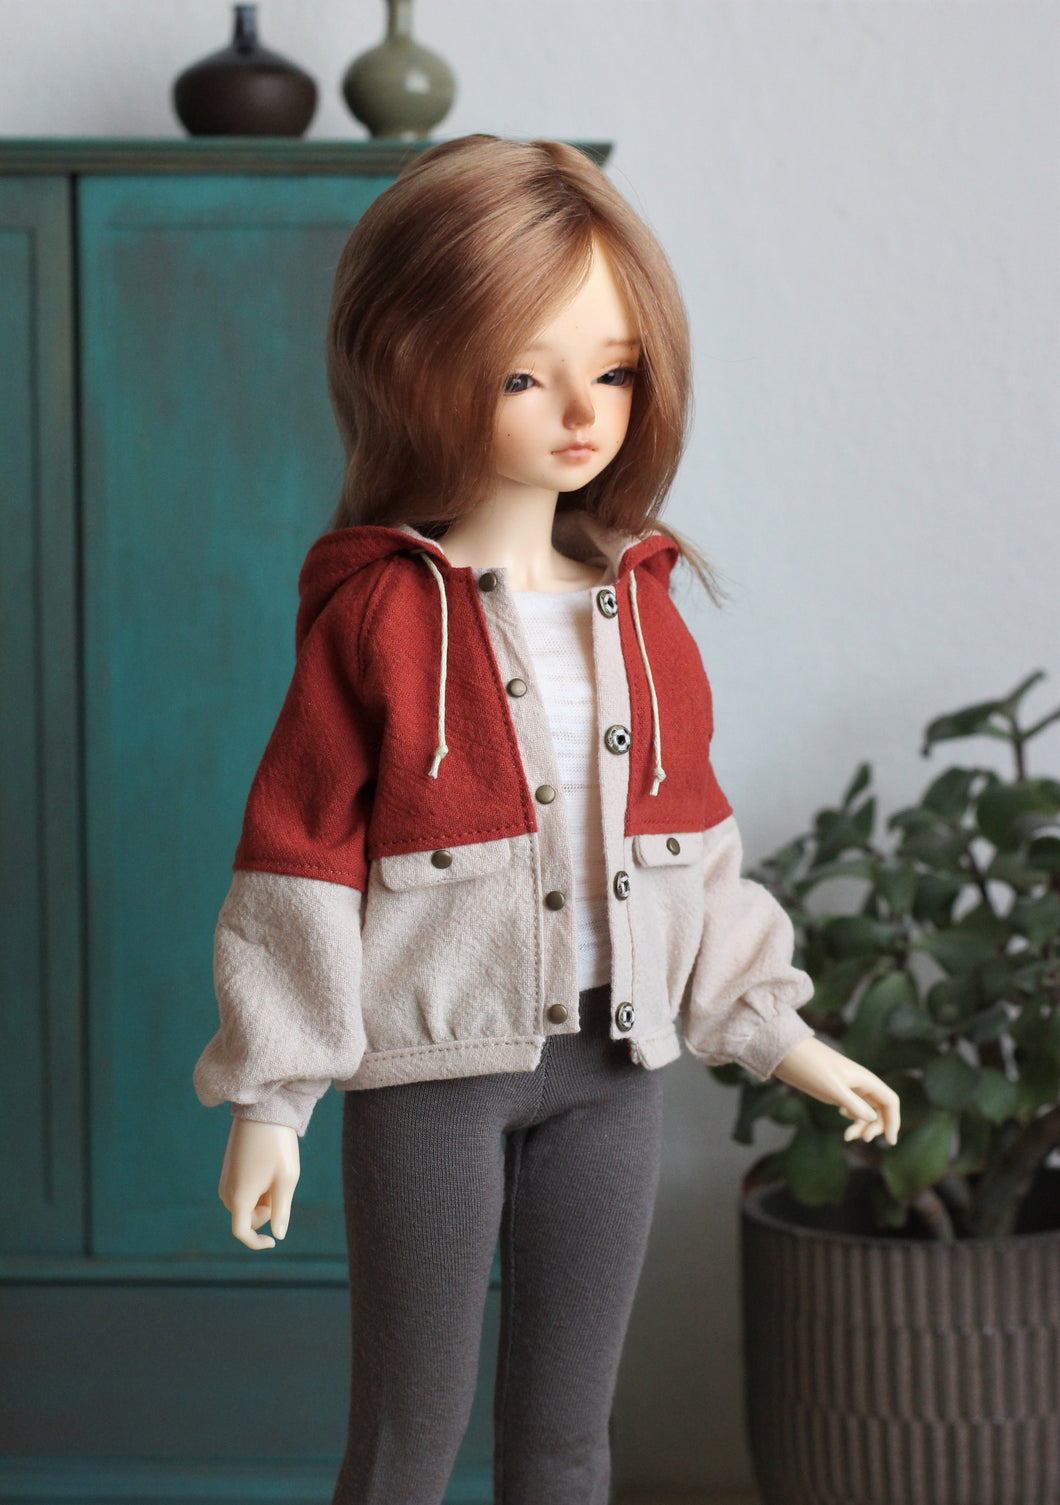 Rust Red Windbreaker Jacket. Fits Girls And Boys